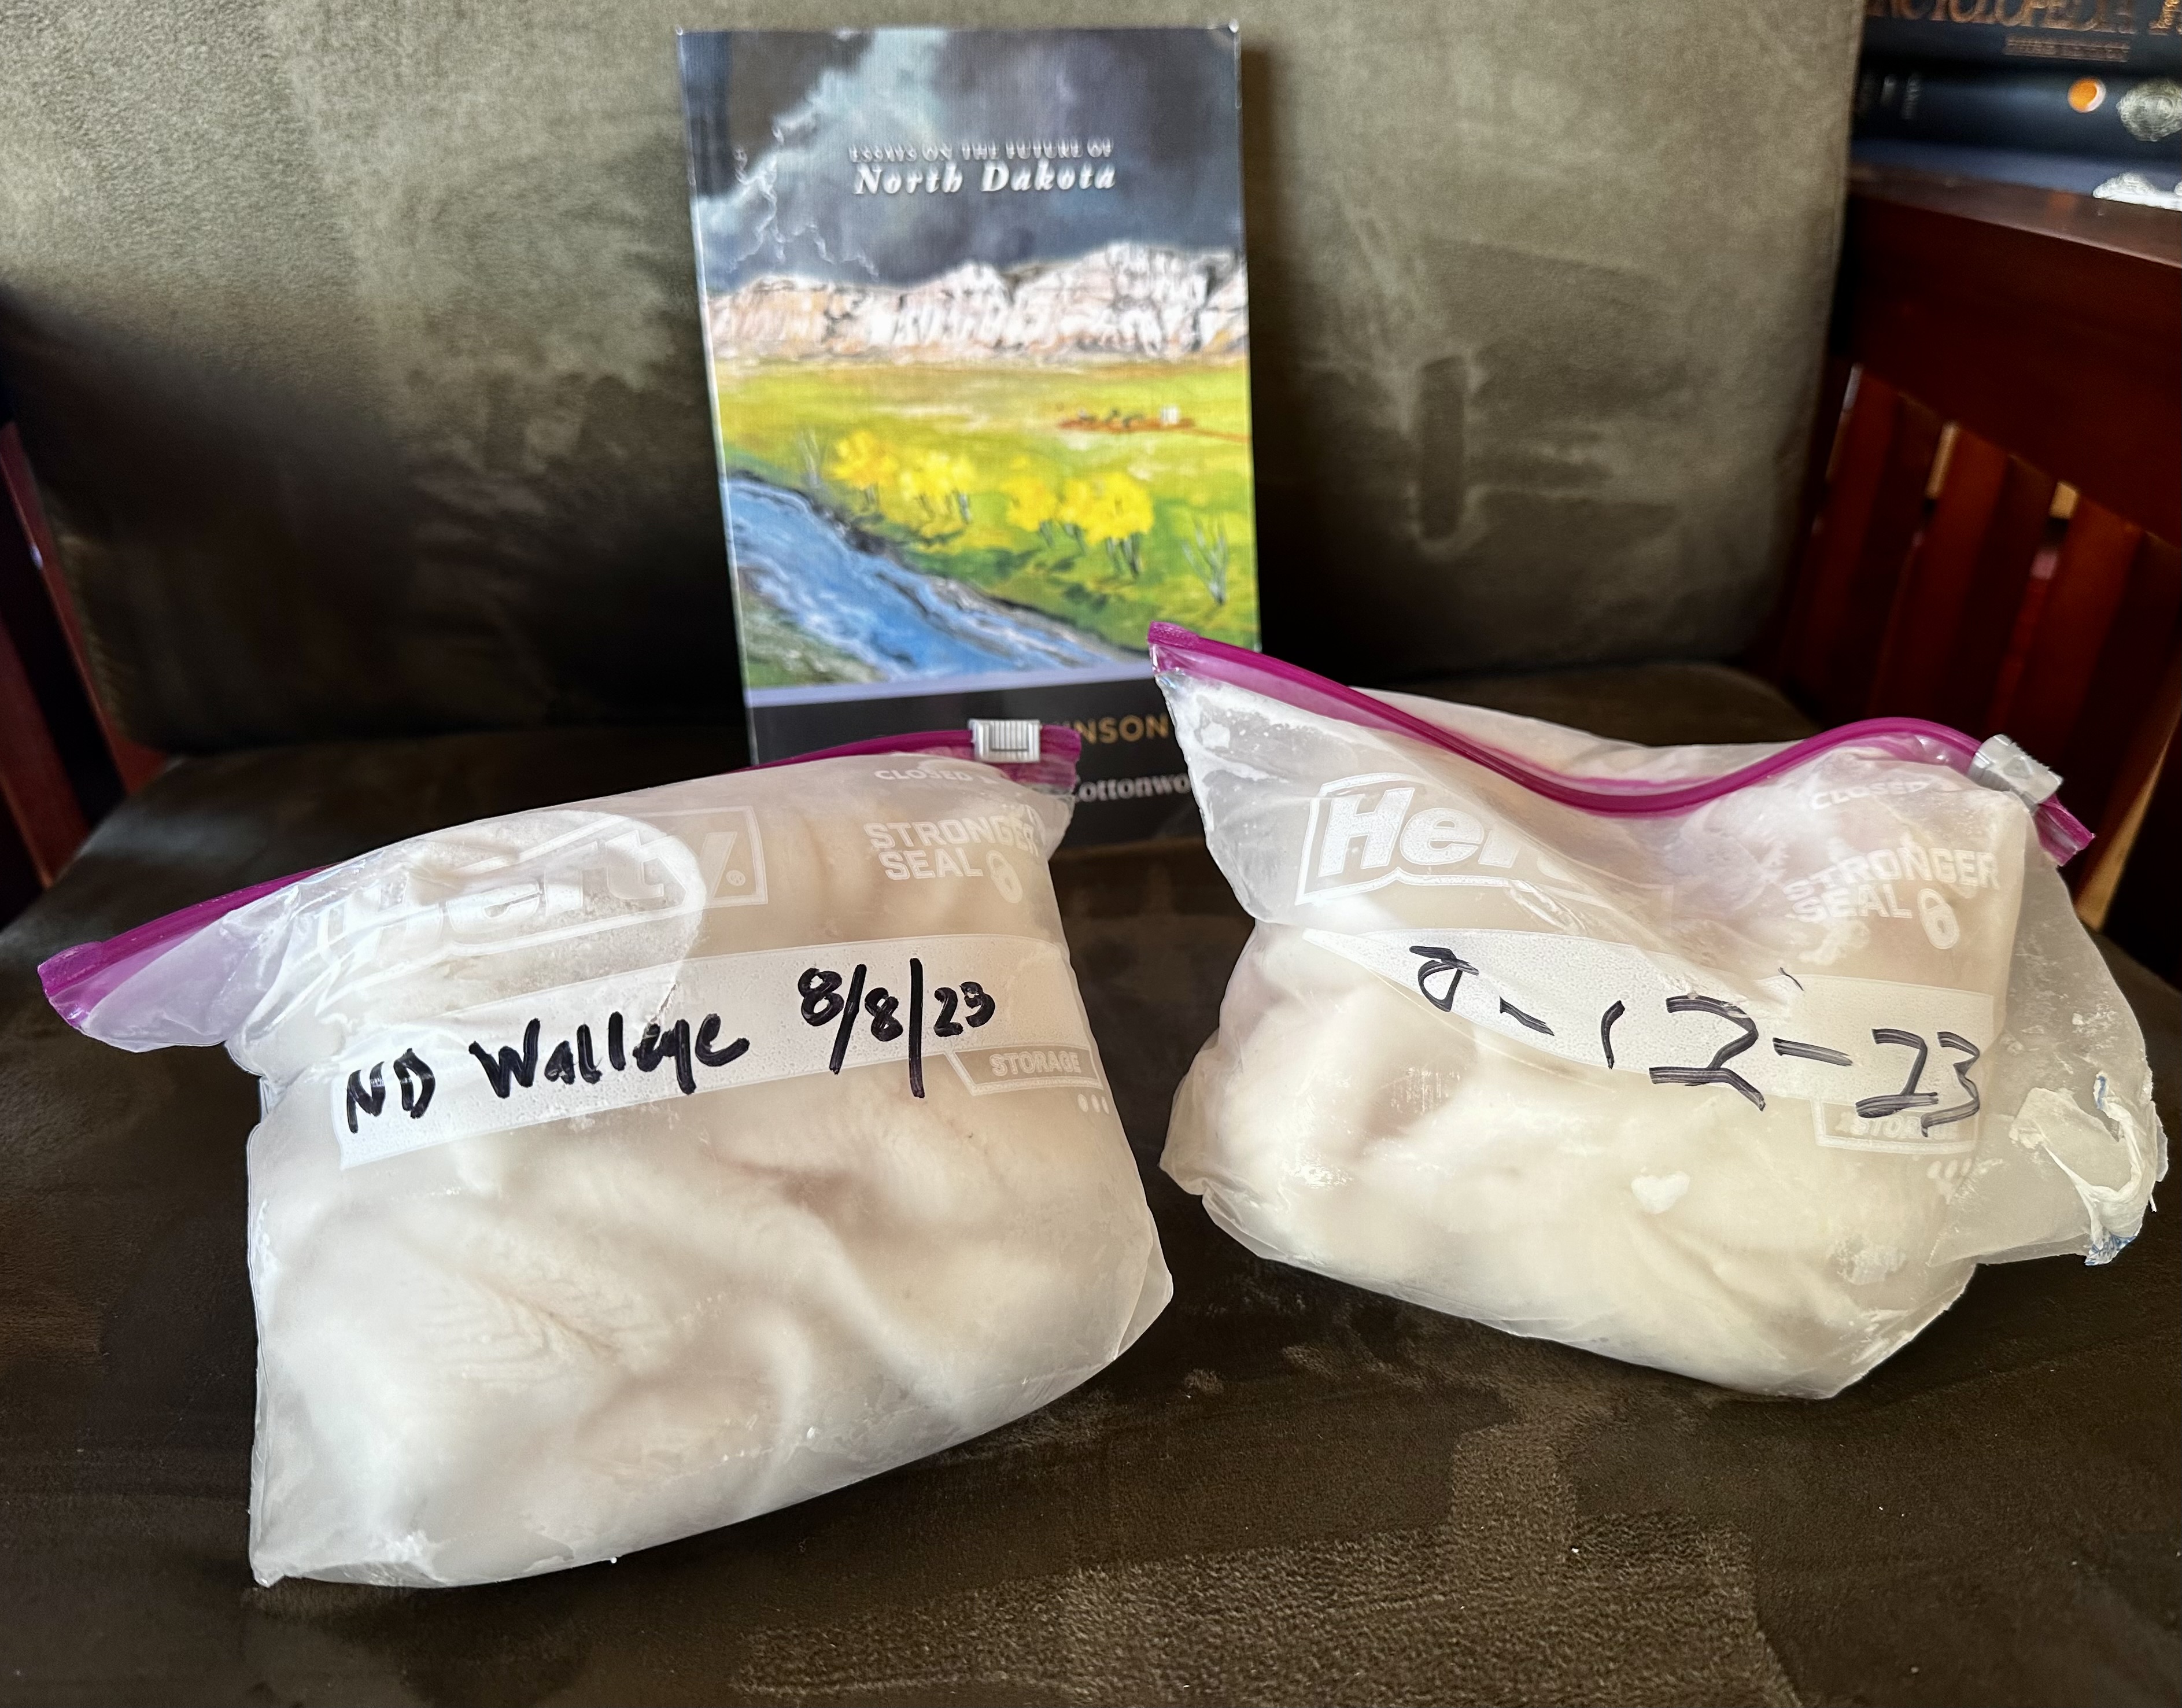 Carl gifts Clay to Ziplock bags of frozen walleye, pictured here with a copy of Clay's book on North Dakota, The Language of the Cottonwoods.